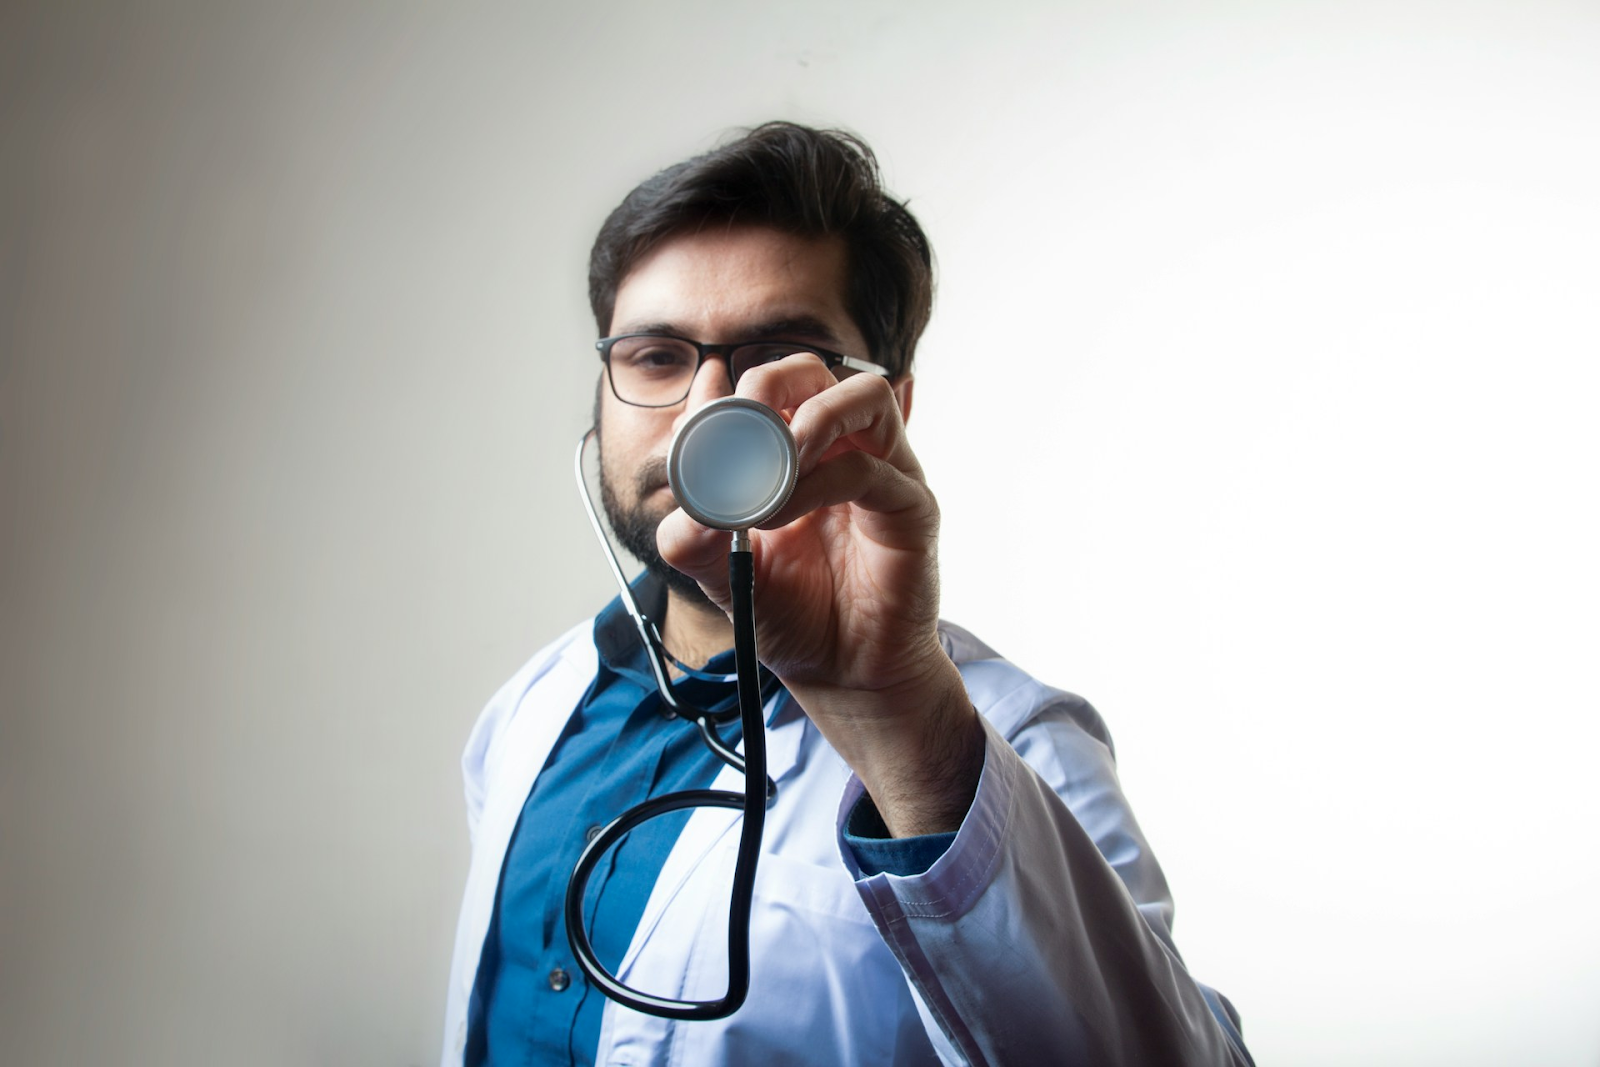 A doctor holding his scope up to the camera in the centre - https://unsplash.com/photos/person-in-white-shirt-holding-black-and-silver-headphones-atn5XAZtRYE